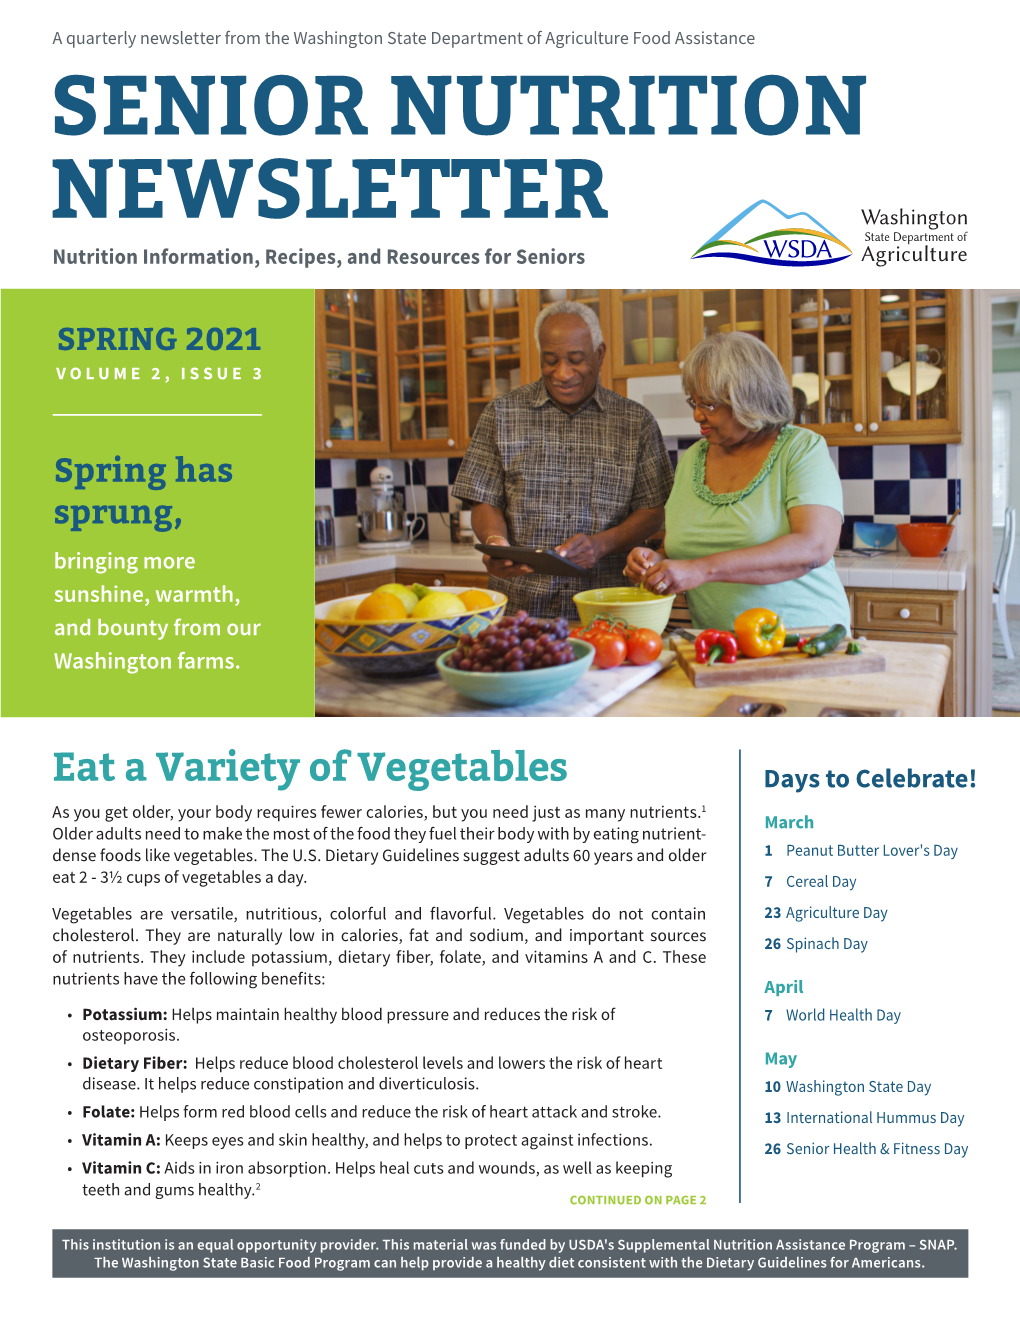 SENIOR NUTRITION NEWSLETTER Nutrition Information, Recipes, and Resources for Seniors